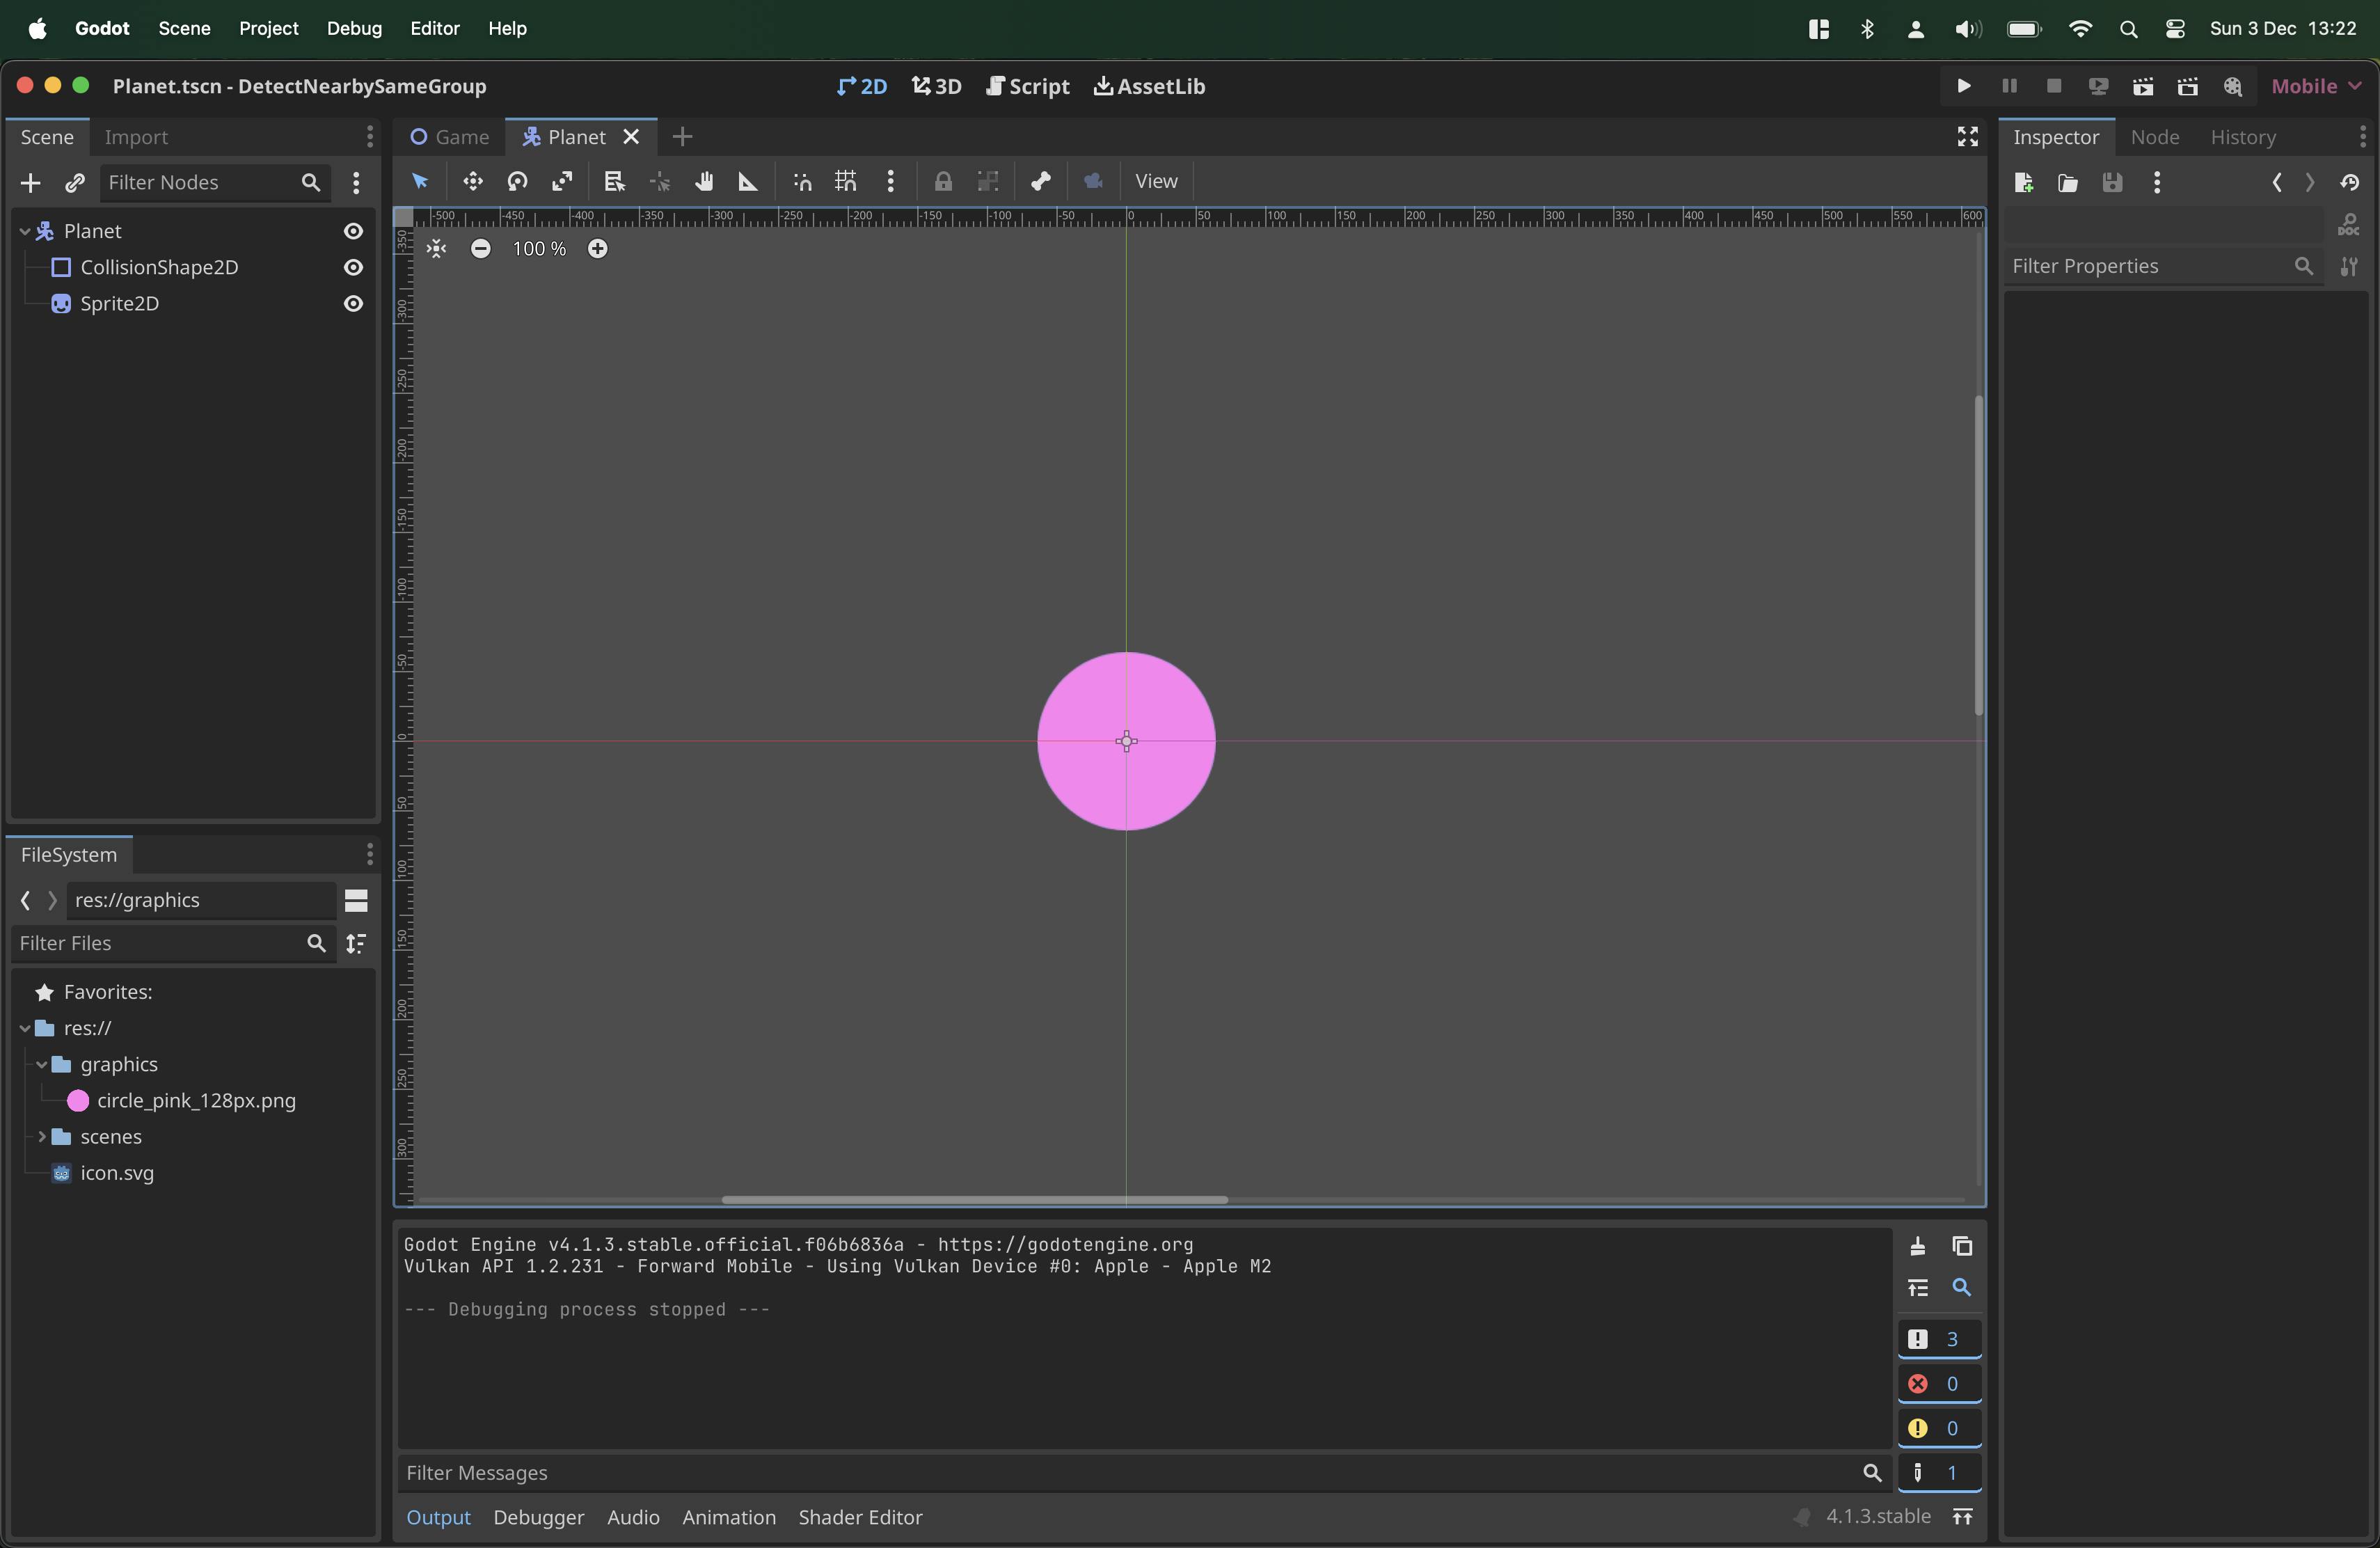 CharacterBody2D node basic setup with a Sprite2D and CollisionShape2D